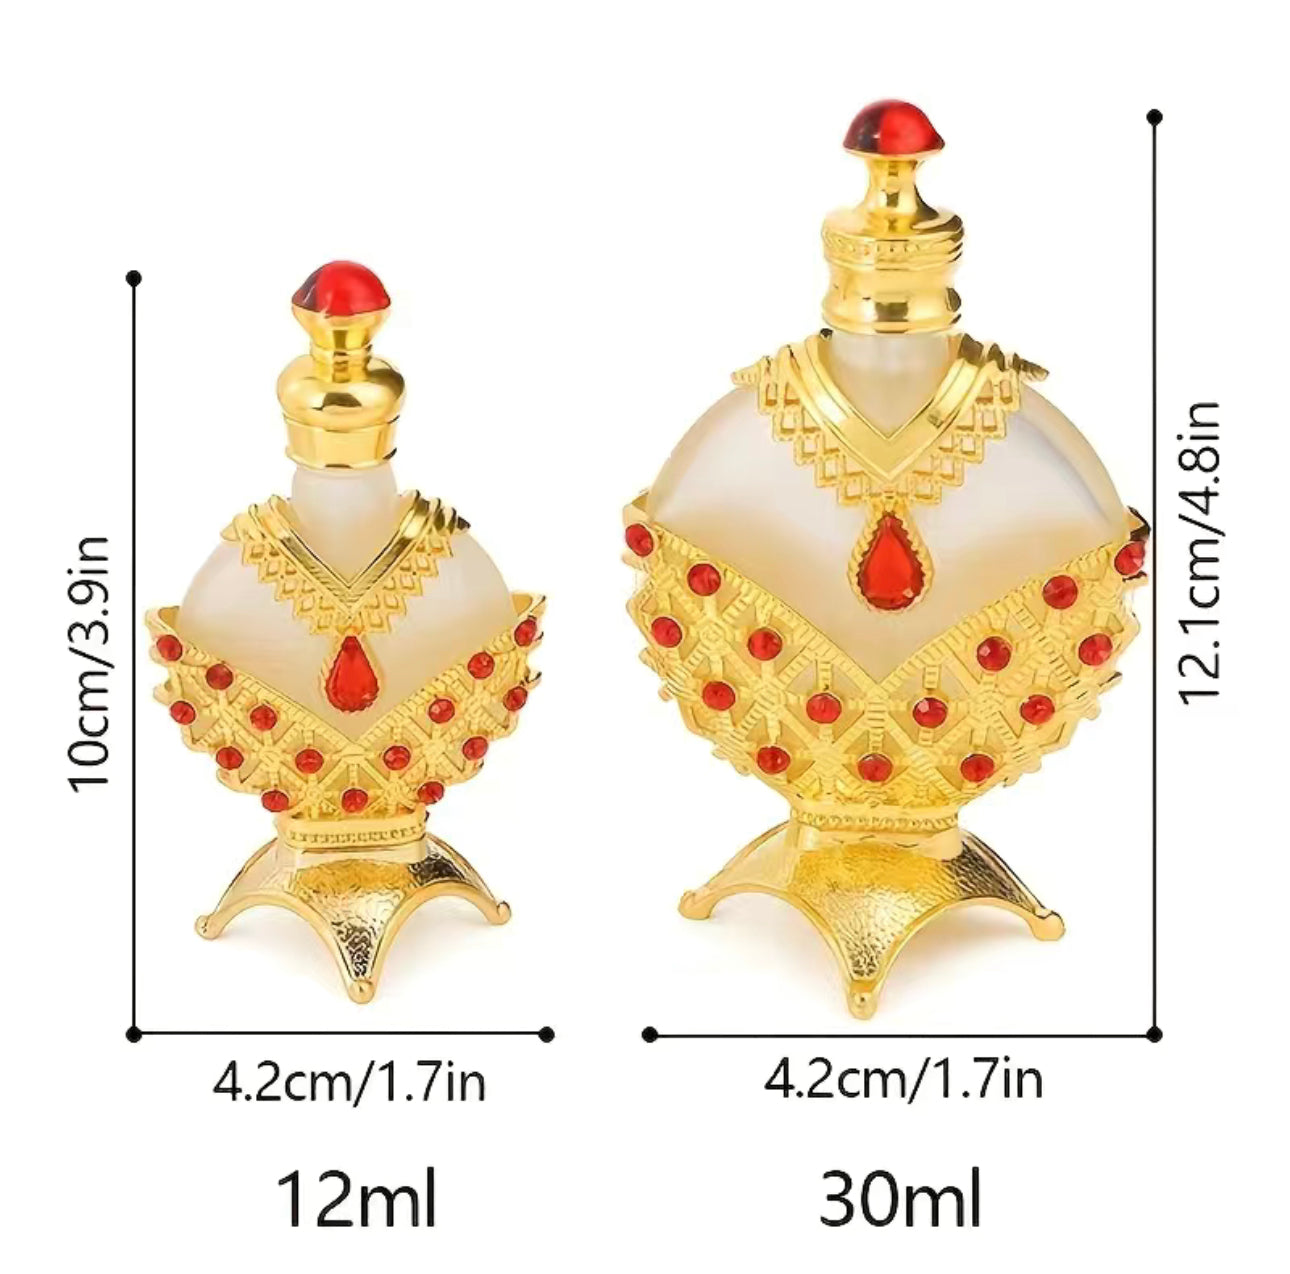 12ml/30ml/1pc Hareem Al Sultan Golden 2023 Concentrated Perfume Oil Bottle, Arab Women's Perfume Bottle, Vintage Essential Oil Perfume Bottle, Women's Gift, Travel, Valentine's Day (No Perfume, Only Empty Bottle)